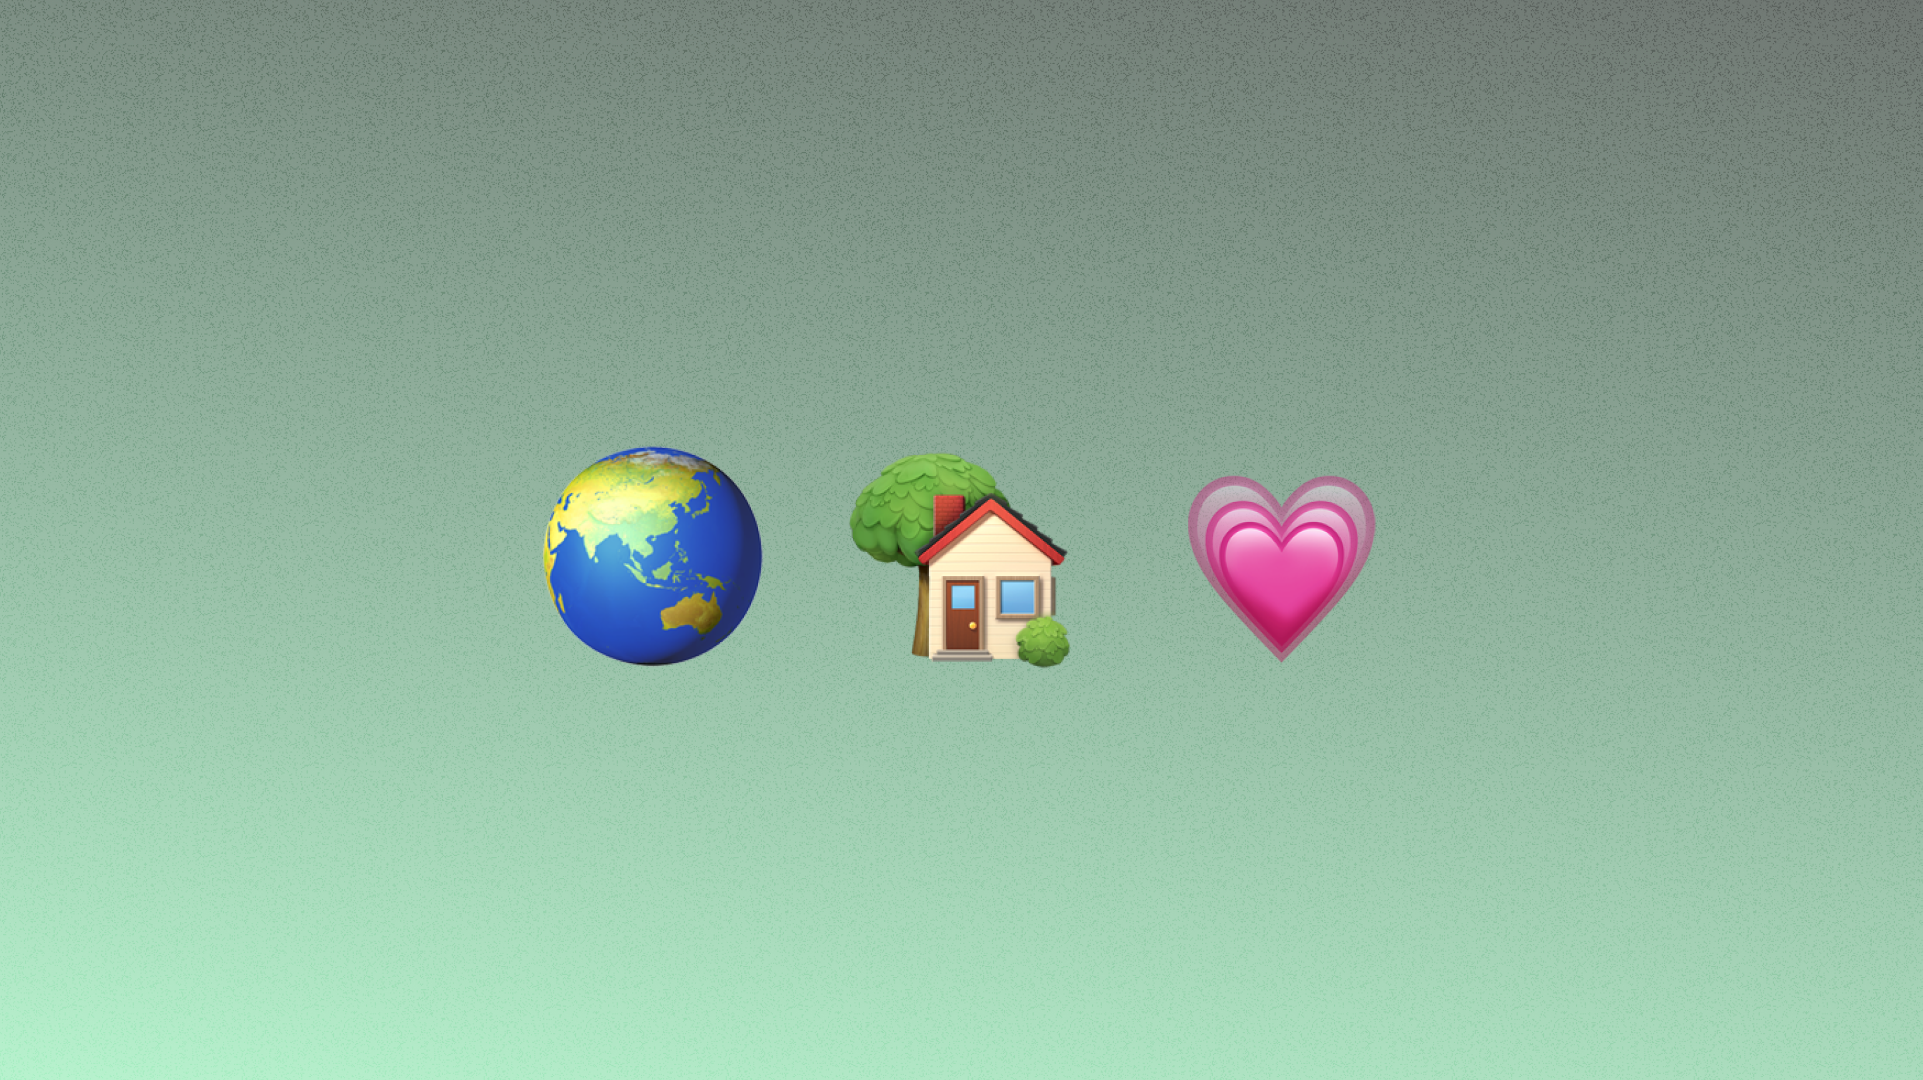 Cover photo for blog post titled How to Live Sustainably with Your Housemates. Symbols containing earth, house and love heart.